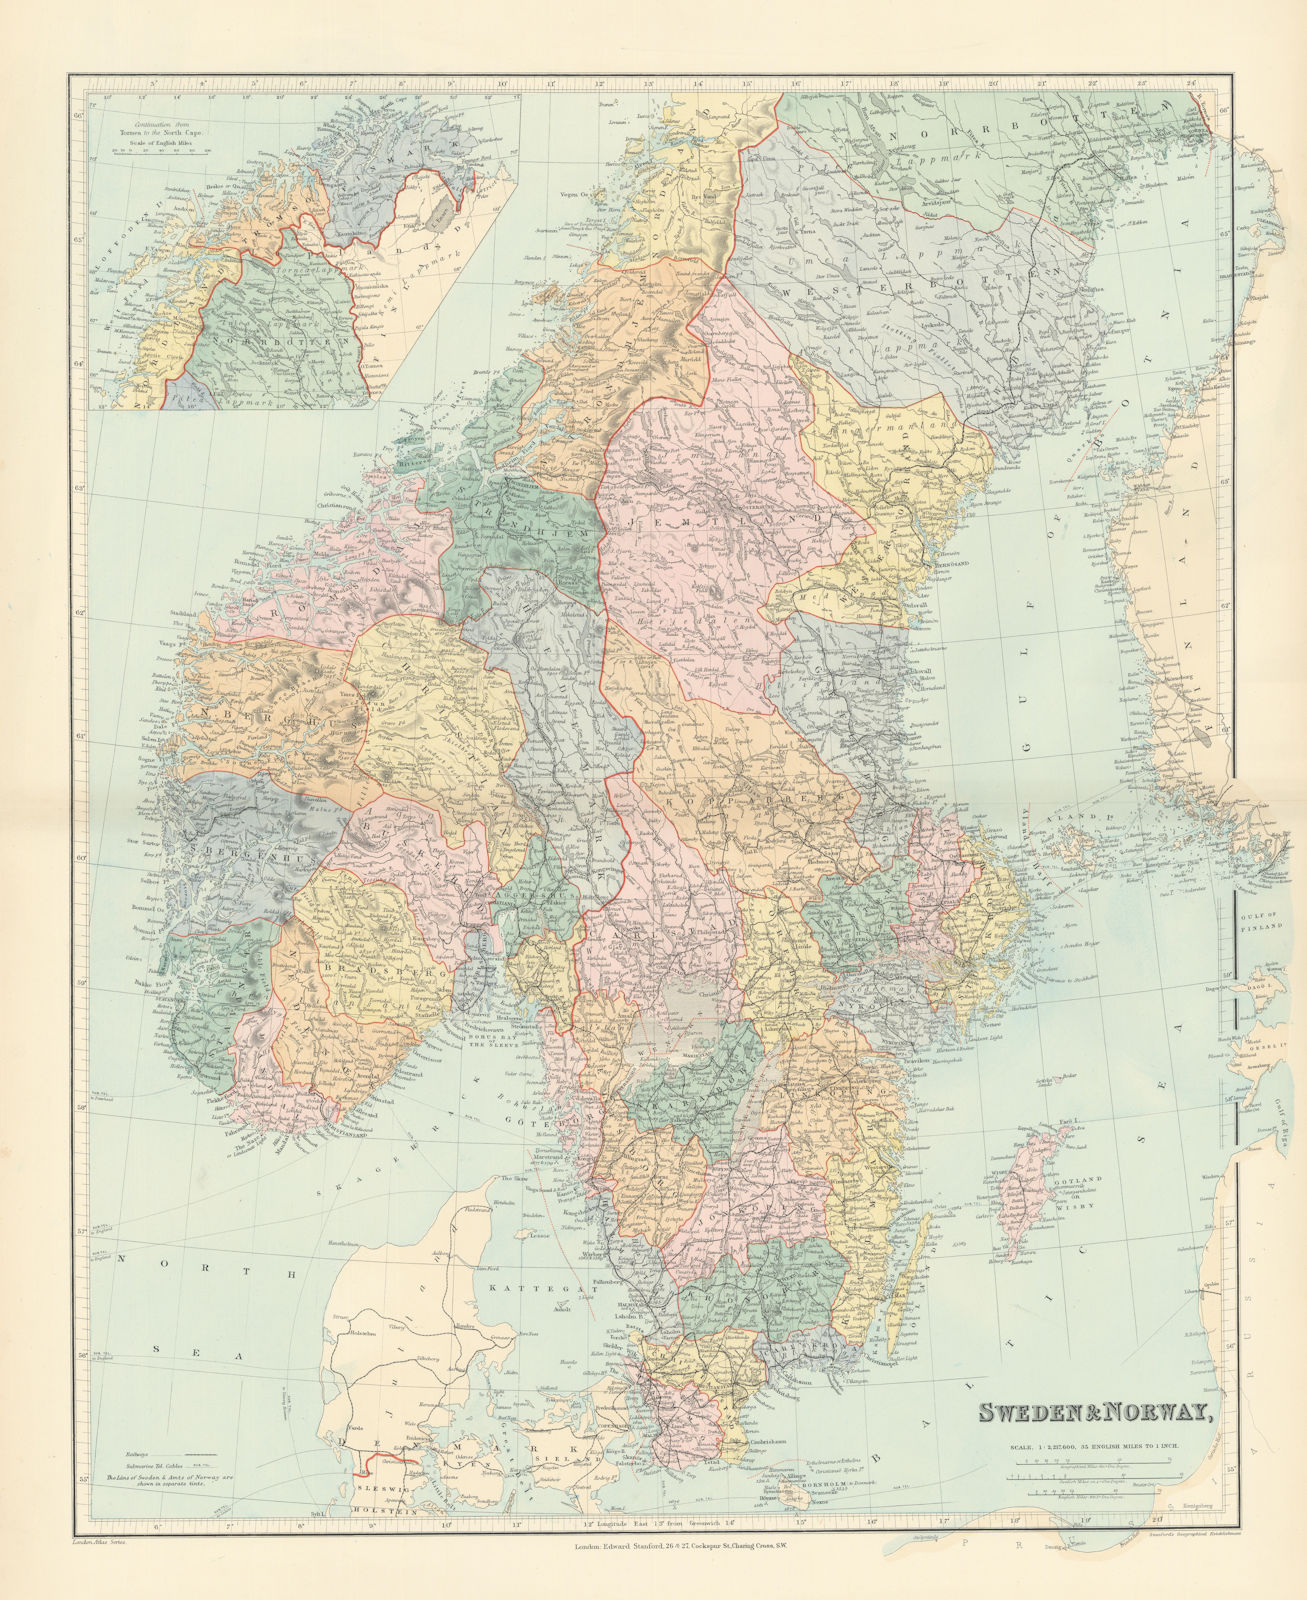 Scandinavia physical mountains fjords glaciers. Sweden Norway. STANFORD 1896 map